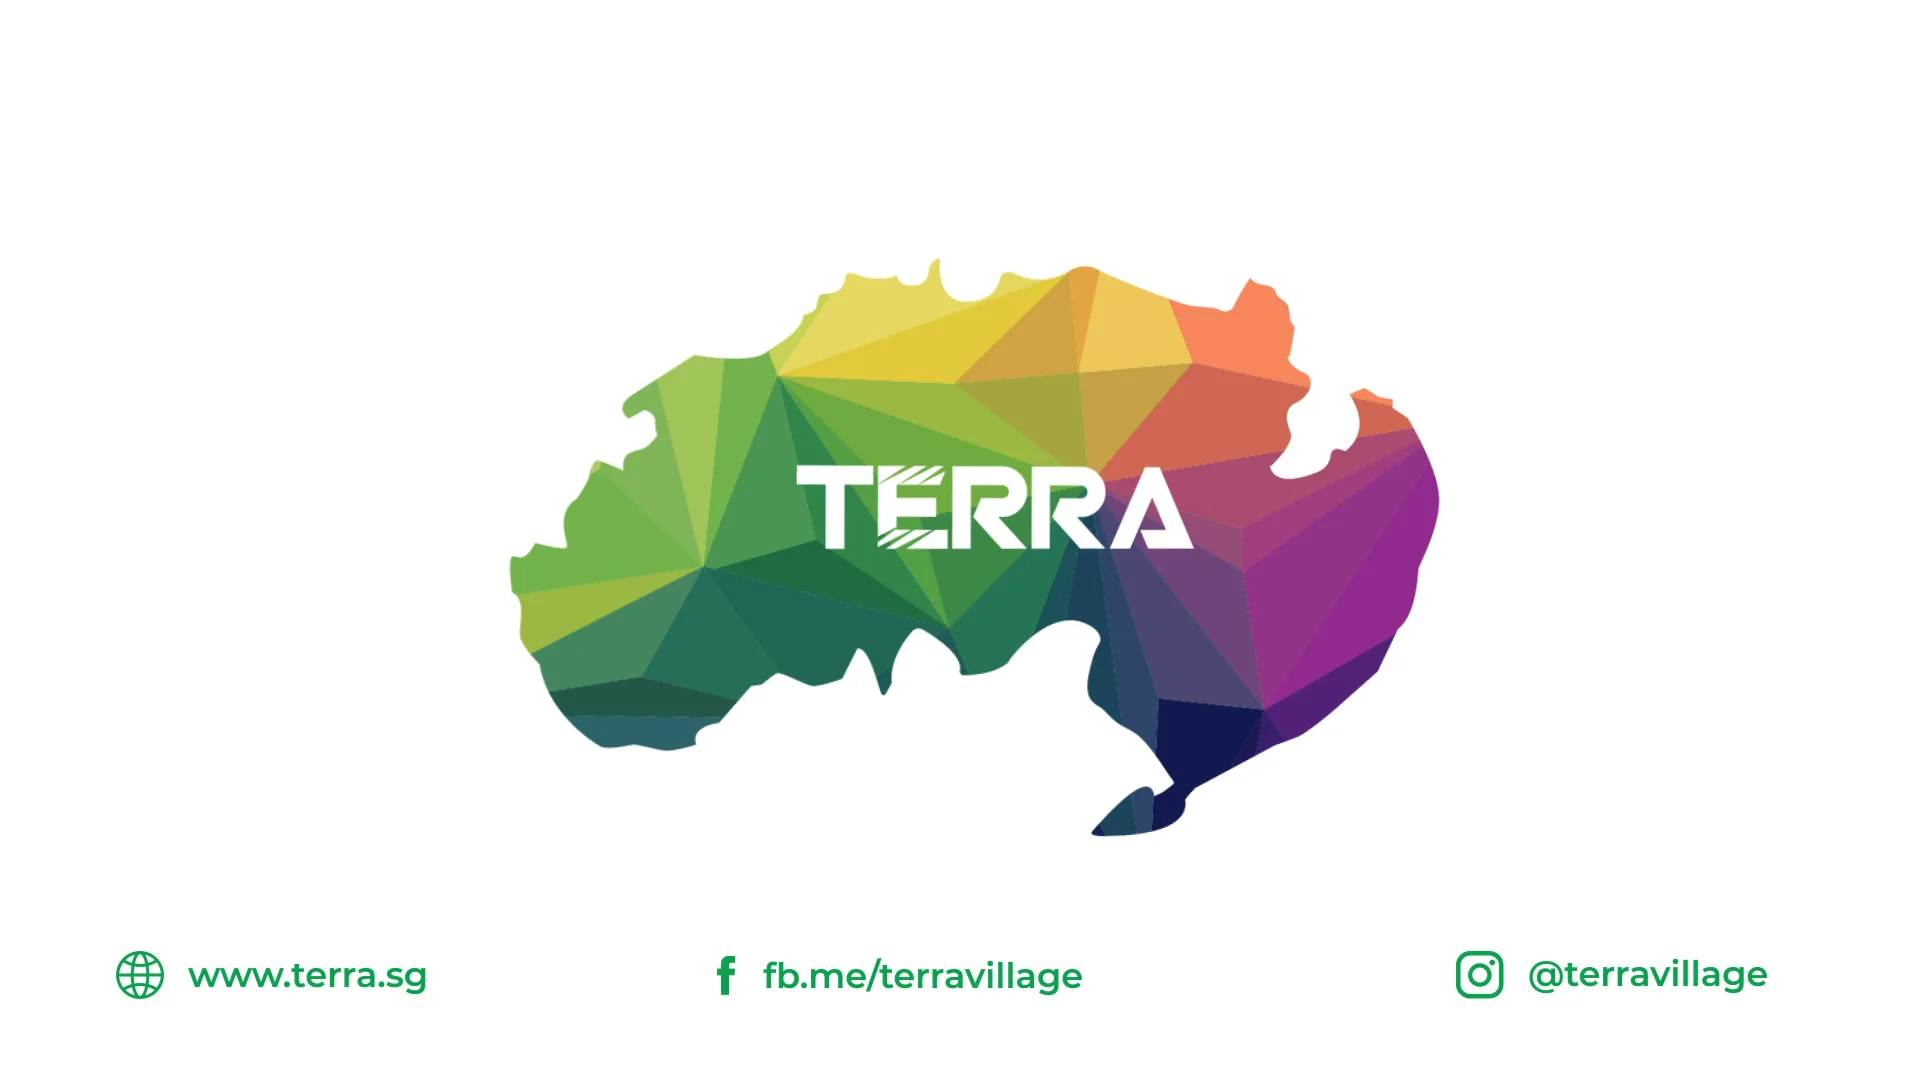 Introduction to Terra SG on Vimeo